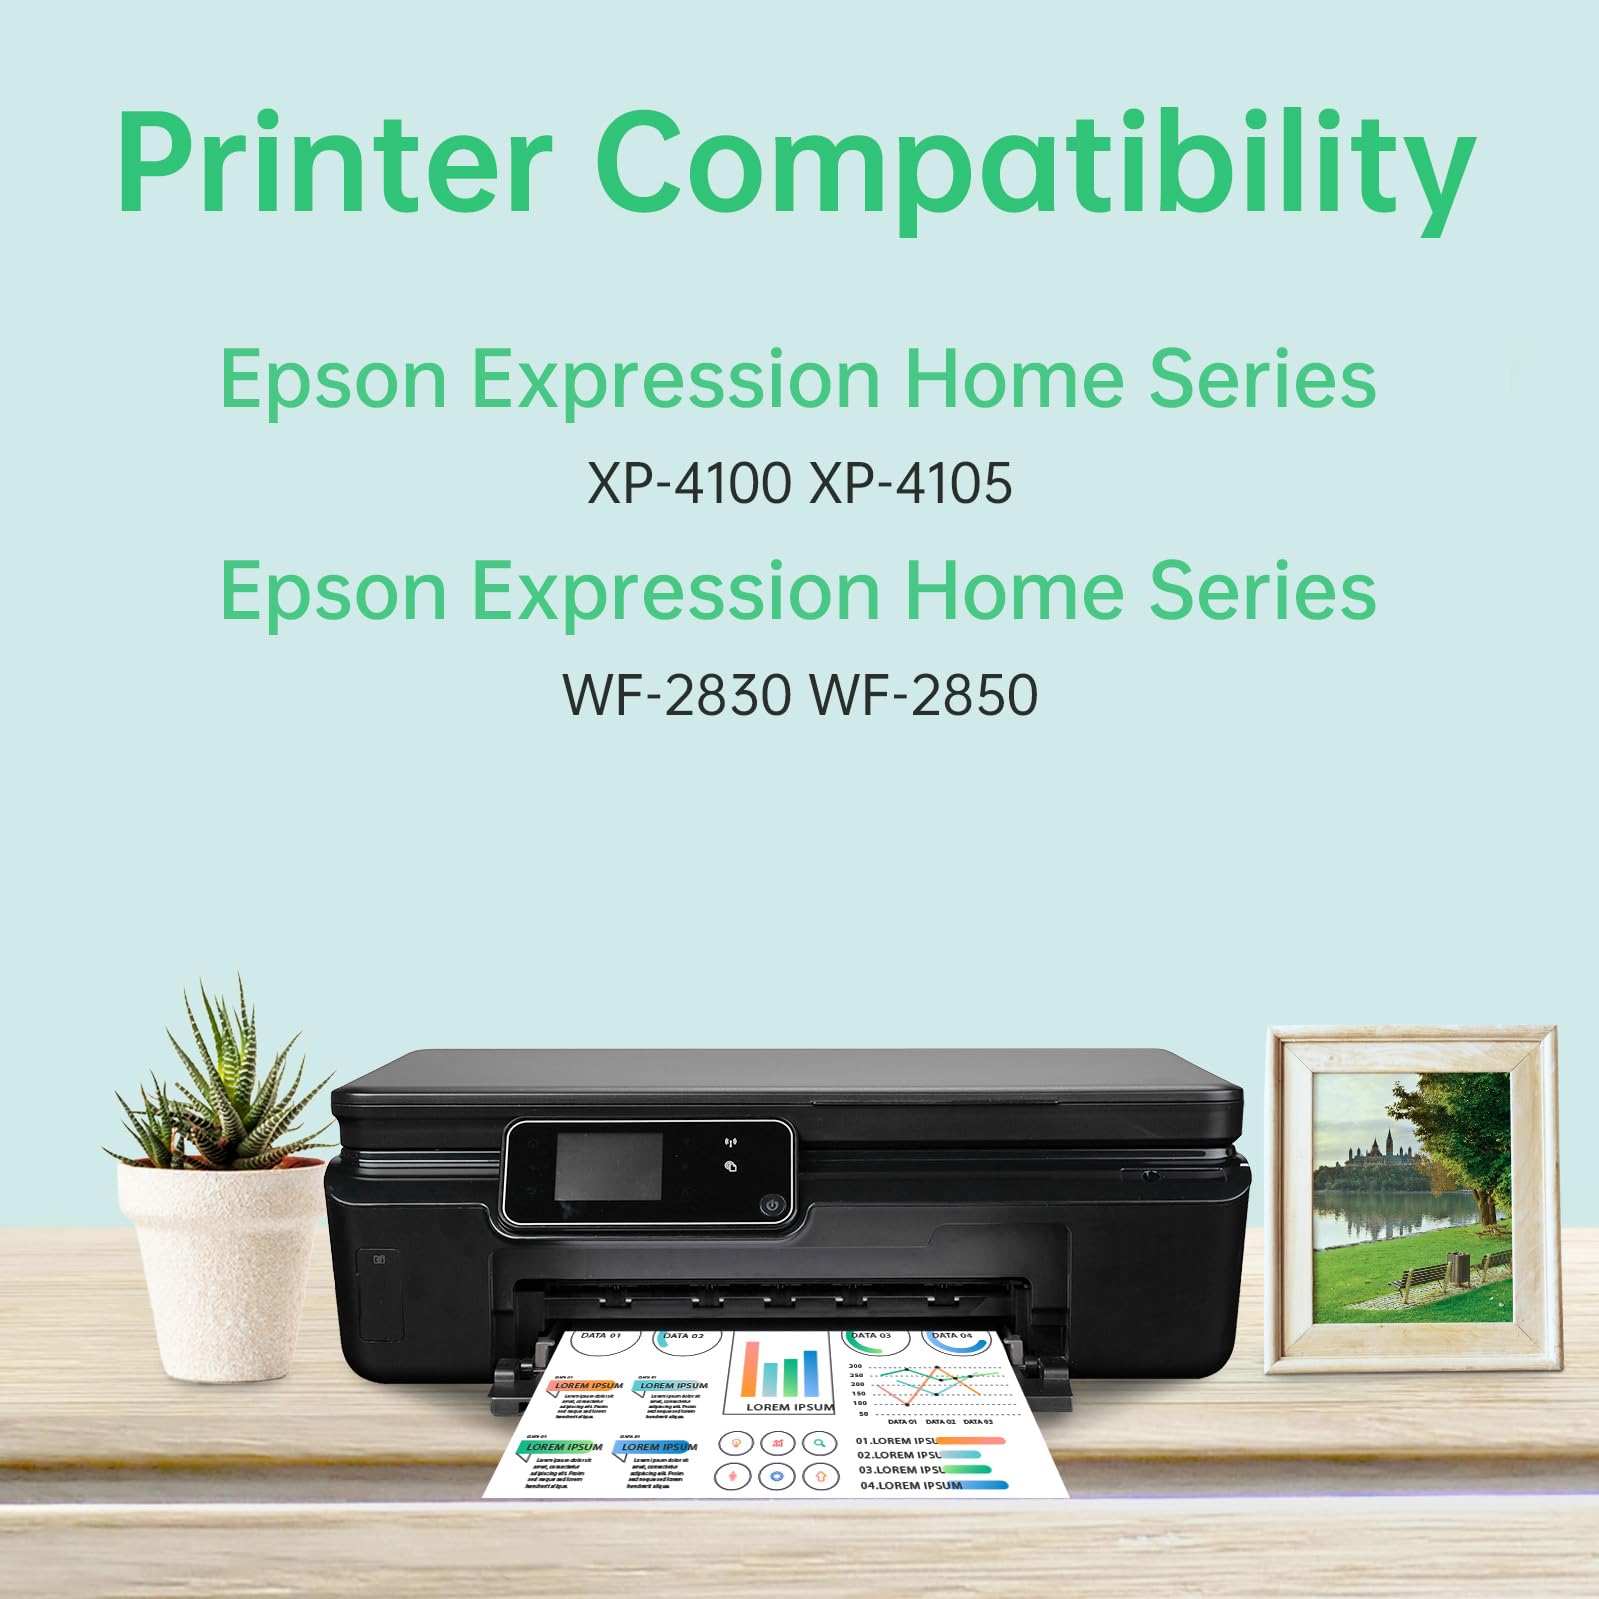 Epson printer compatibility list showing Epson Expression Home Series XP-4100, XP-4105, WF-2830, and WF-2850 models, compatible with LEMERO ink cartridges.